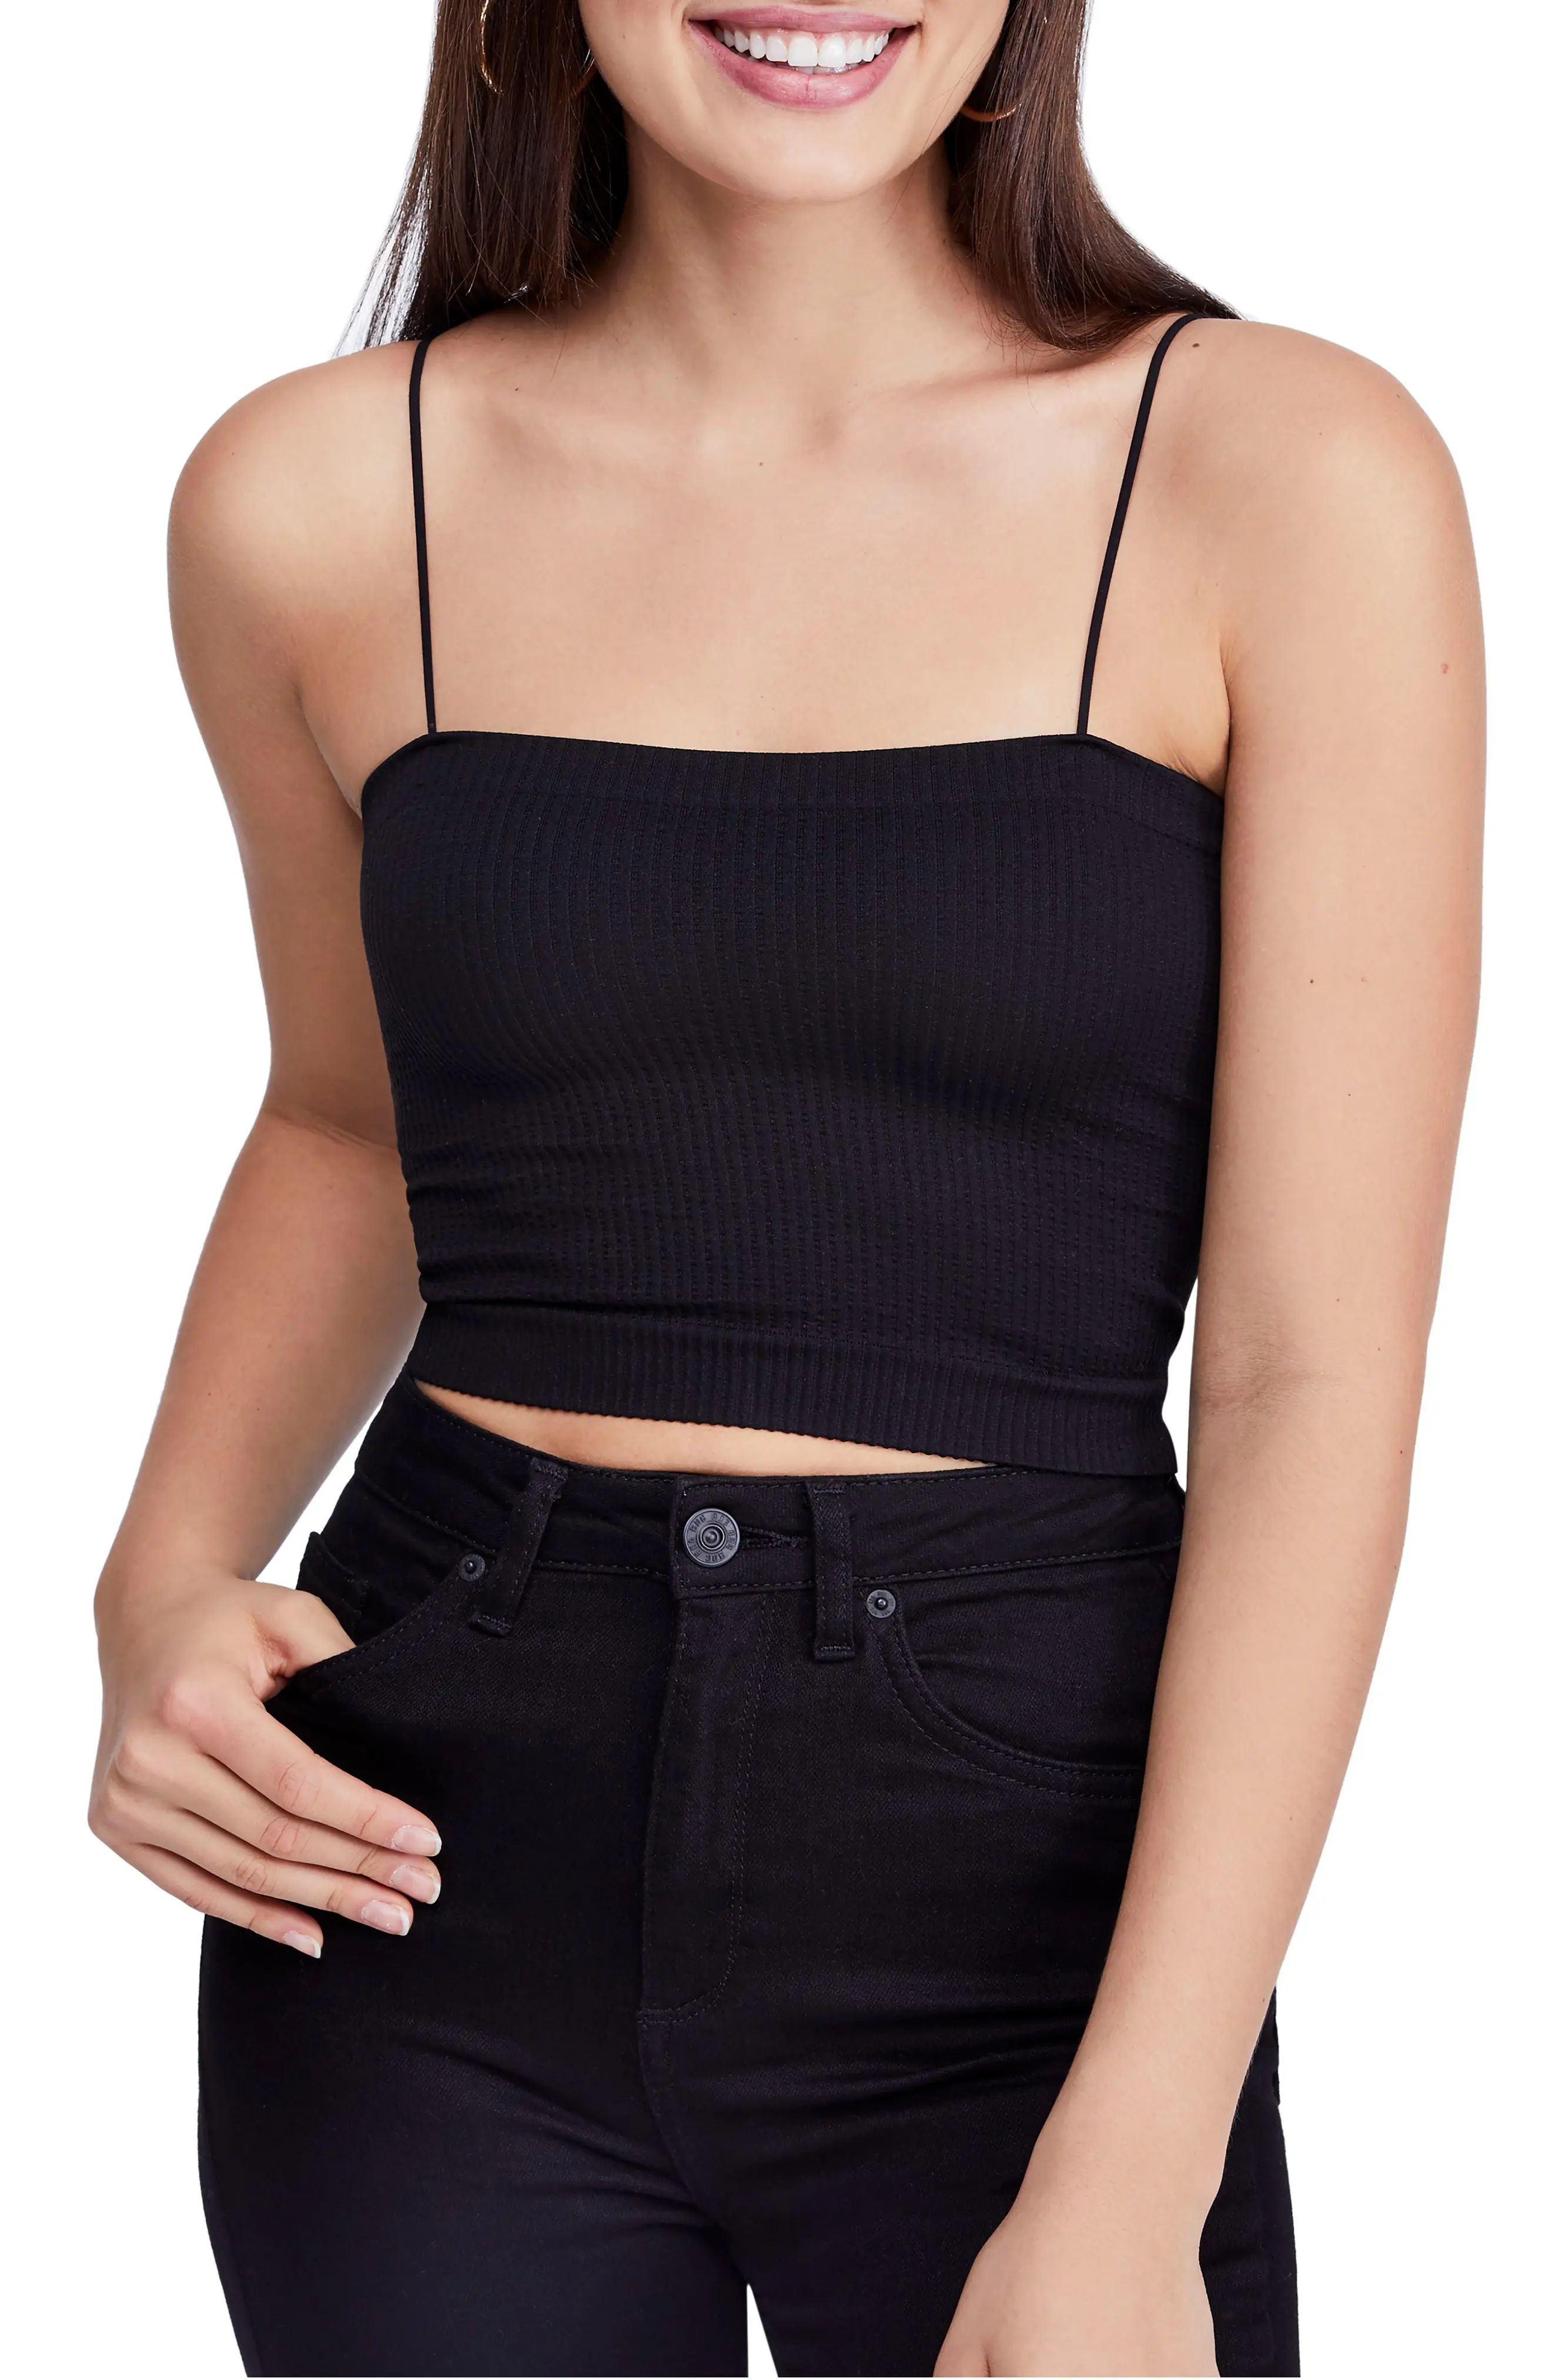 Women's Bdg Urban Outfitters Bungee Strap Tube Top, Size Small - Black | Nordstrom